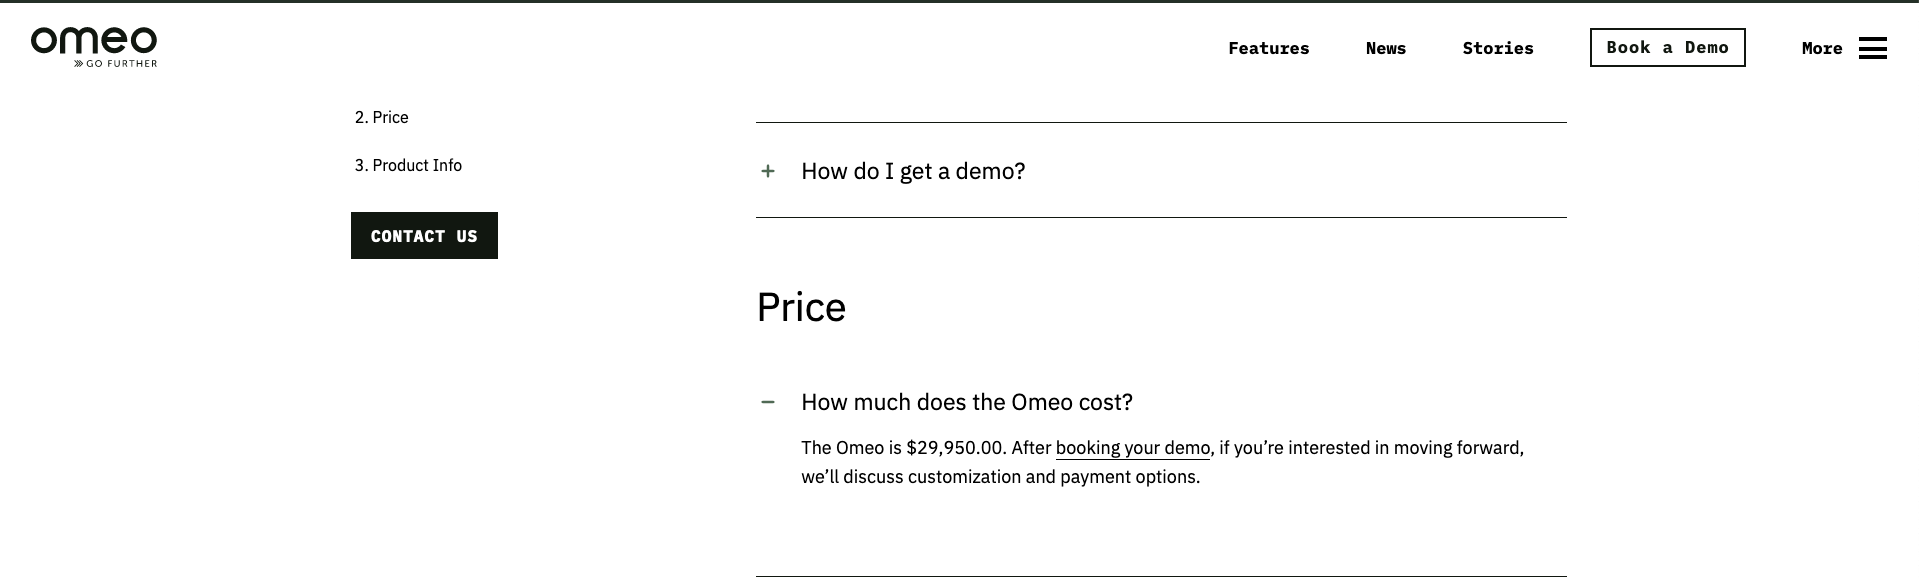 A screenshot of the MyOmeo website showing the price listed as $29,950.00 USD